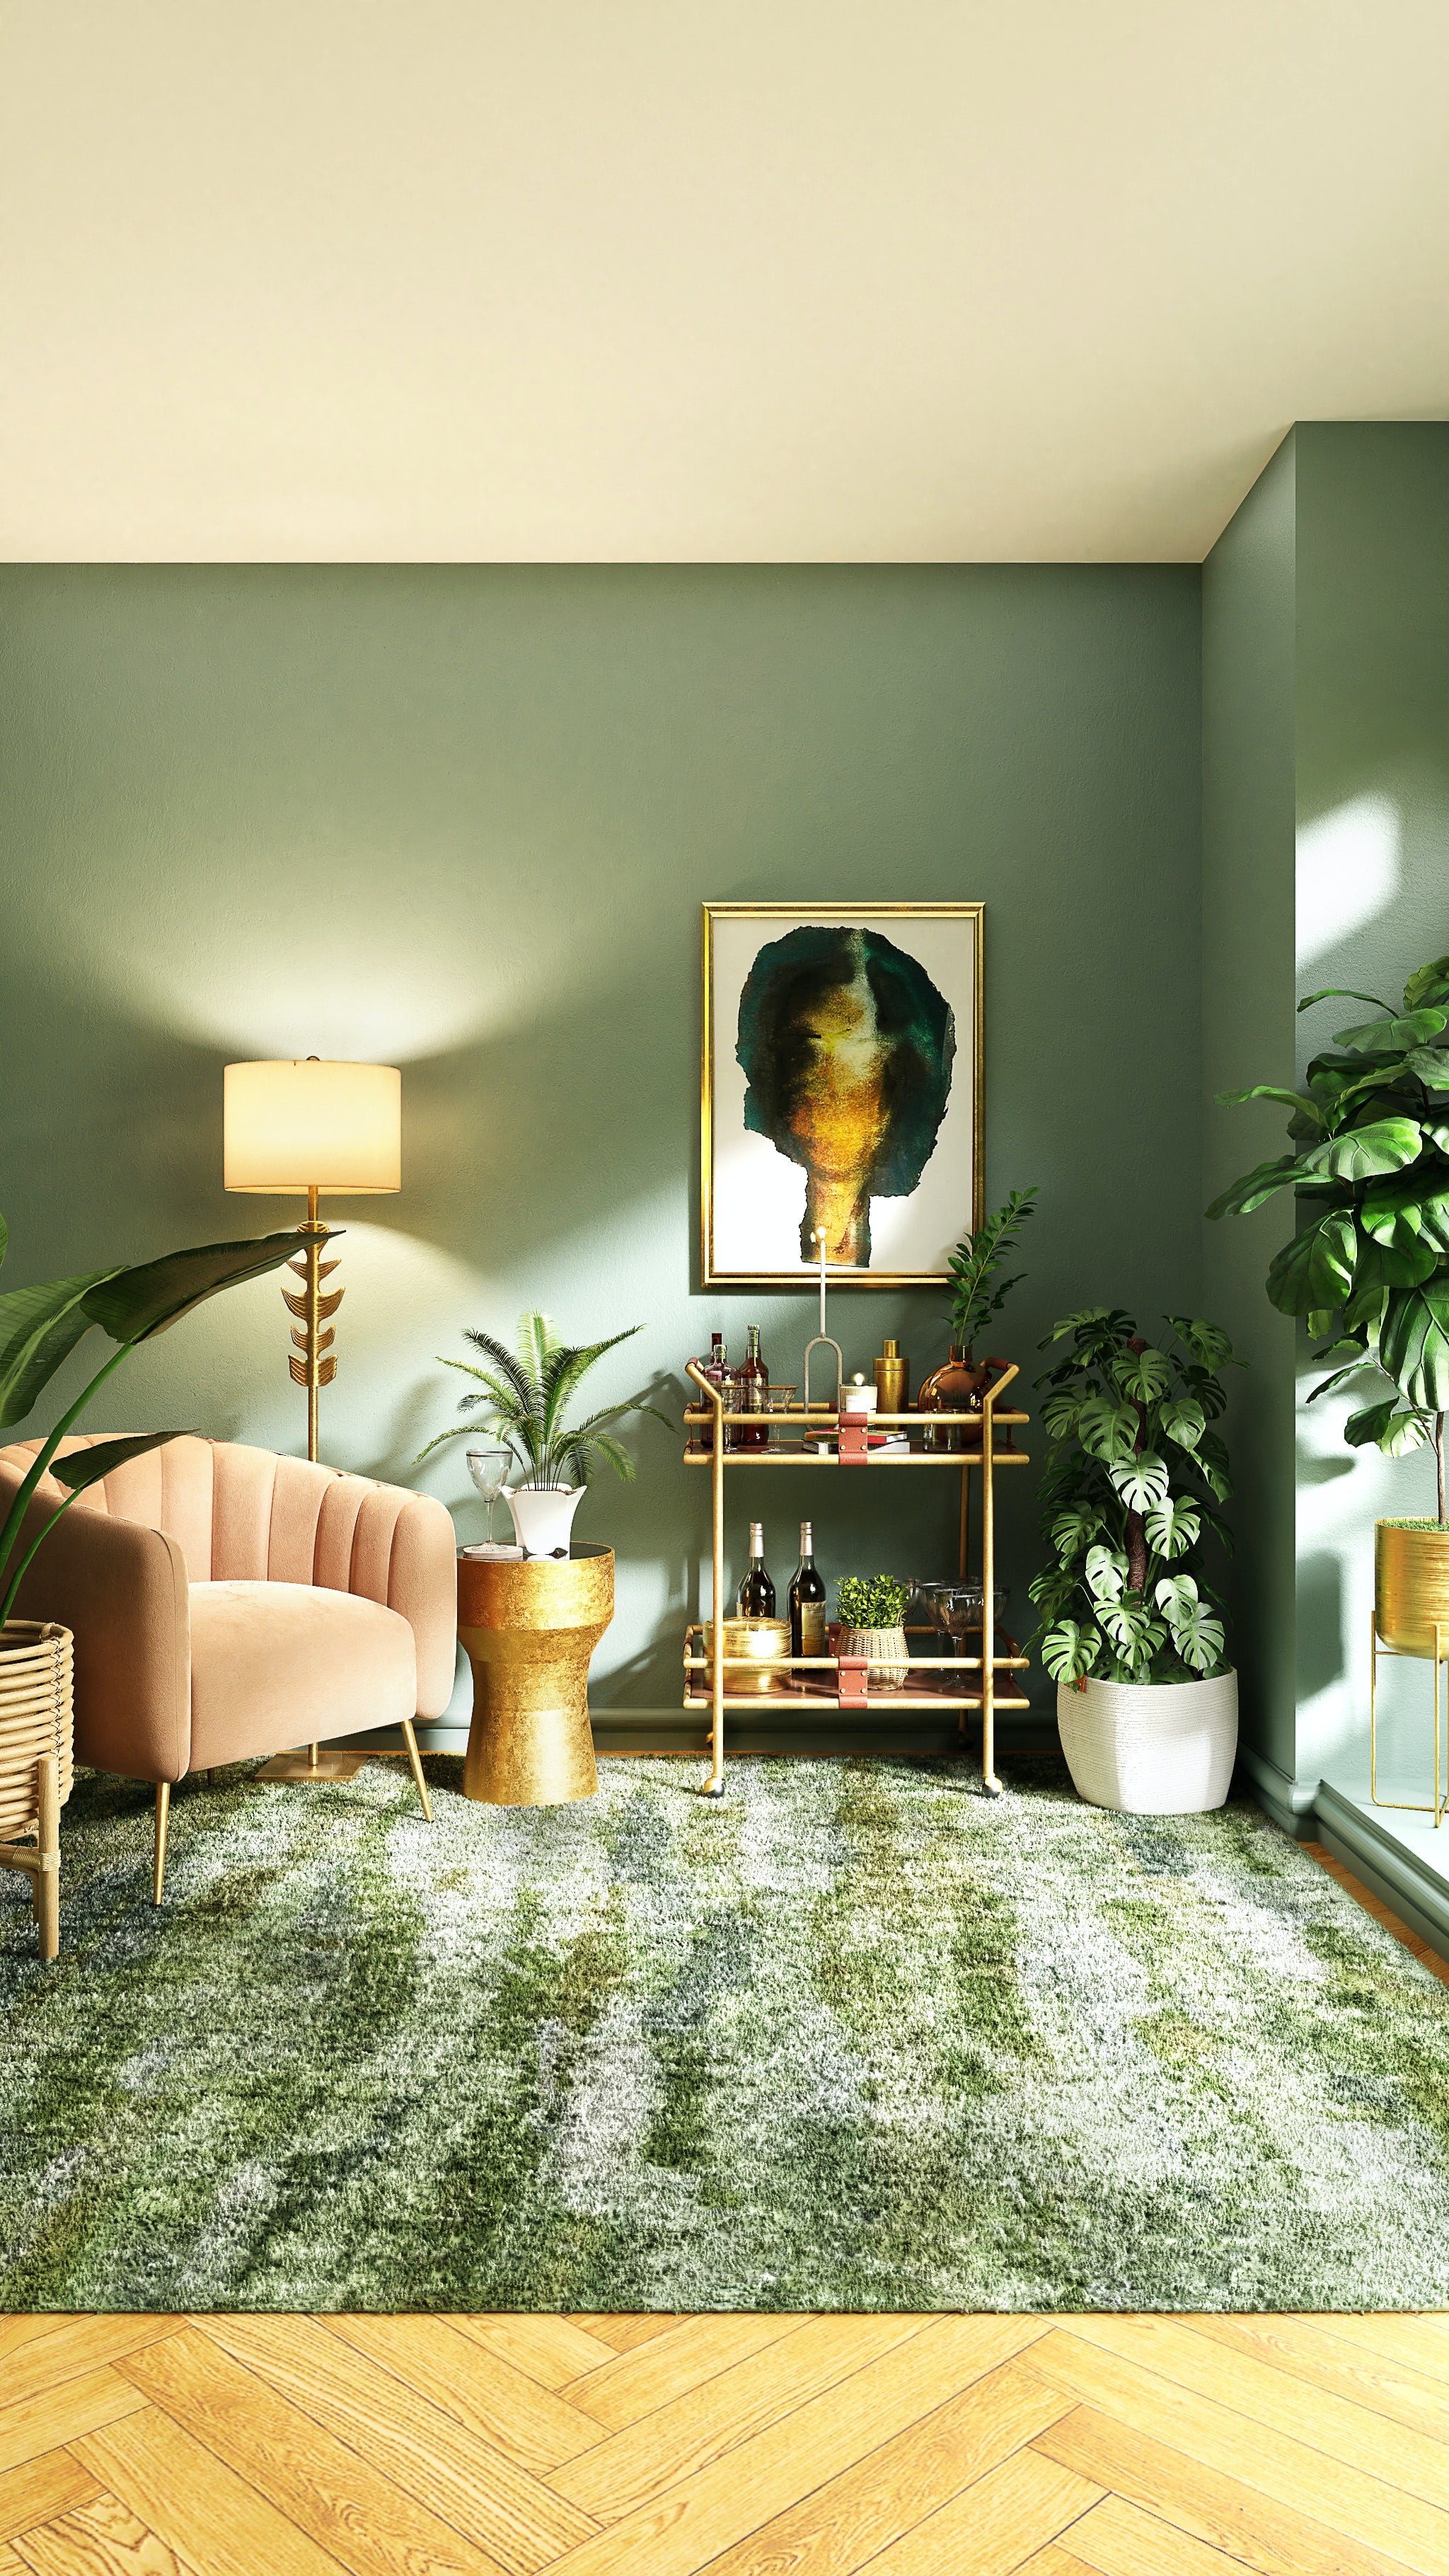 Modern interior sitting area with peach chair, green shaggy rug, gold wine rack, contemporary painting, houseplants, and standing lamp.